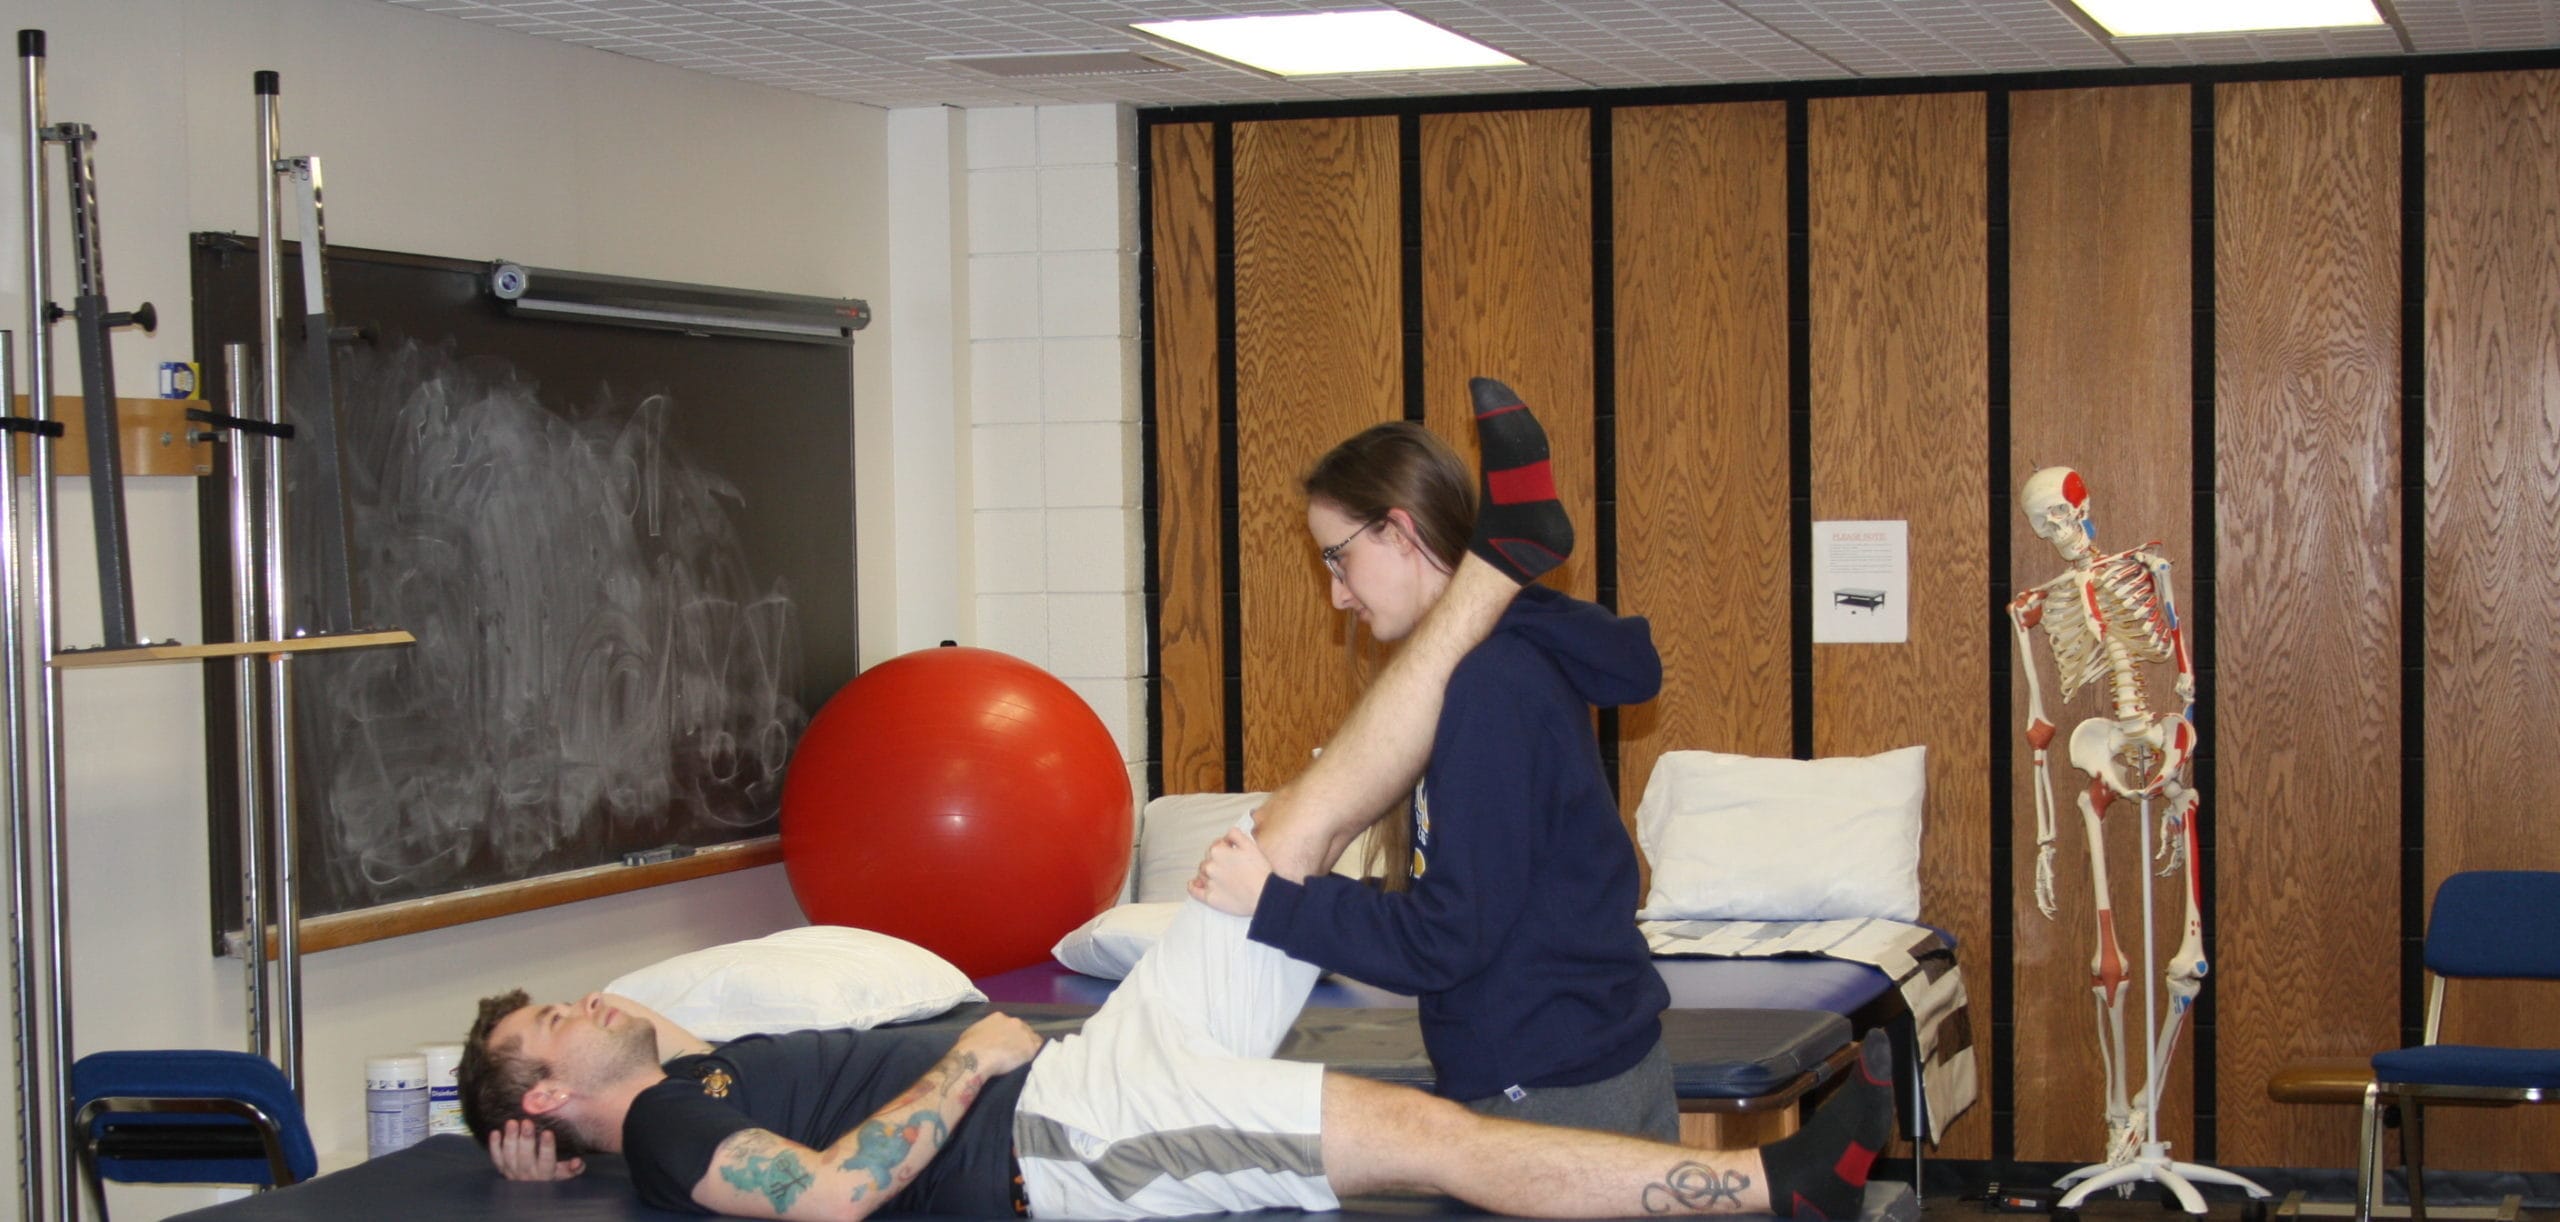 SUNY Niagara Physical Therapist Assistant Program Rewarding in Clinics and Community